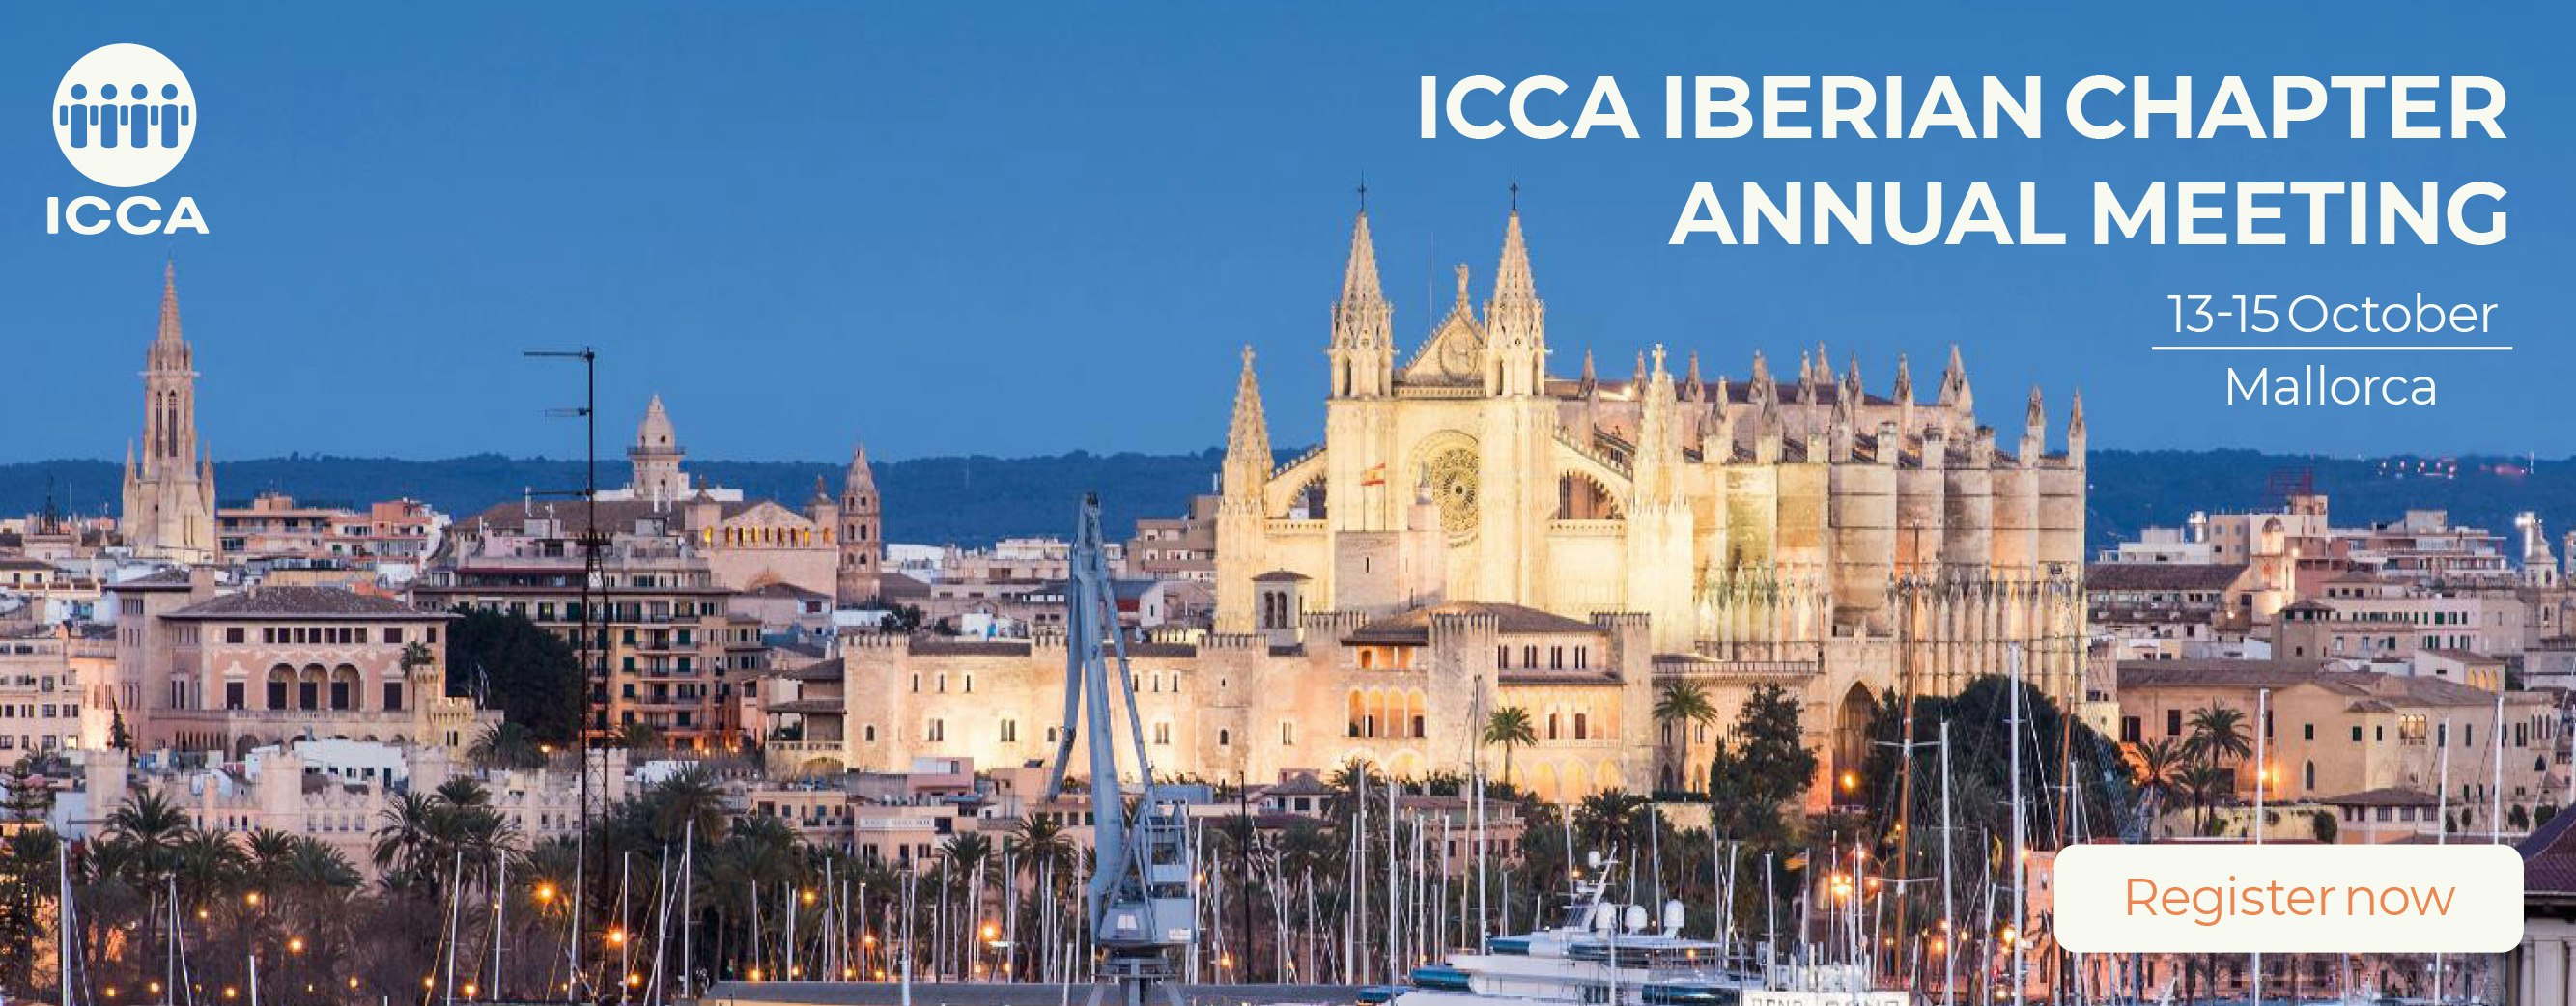 Cover image of ICCA Iberian Annual Chapter Meeting 2021